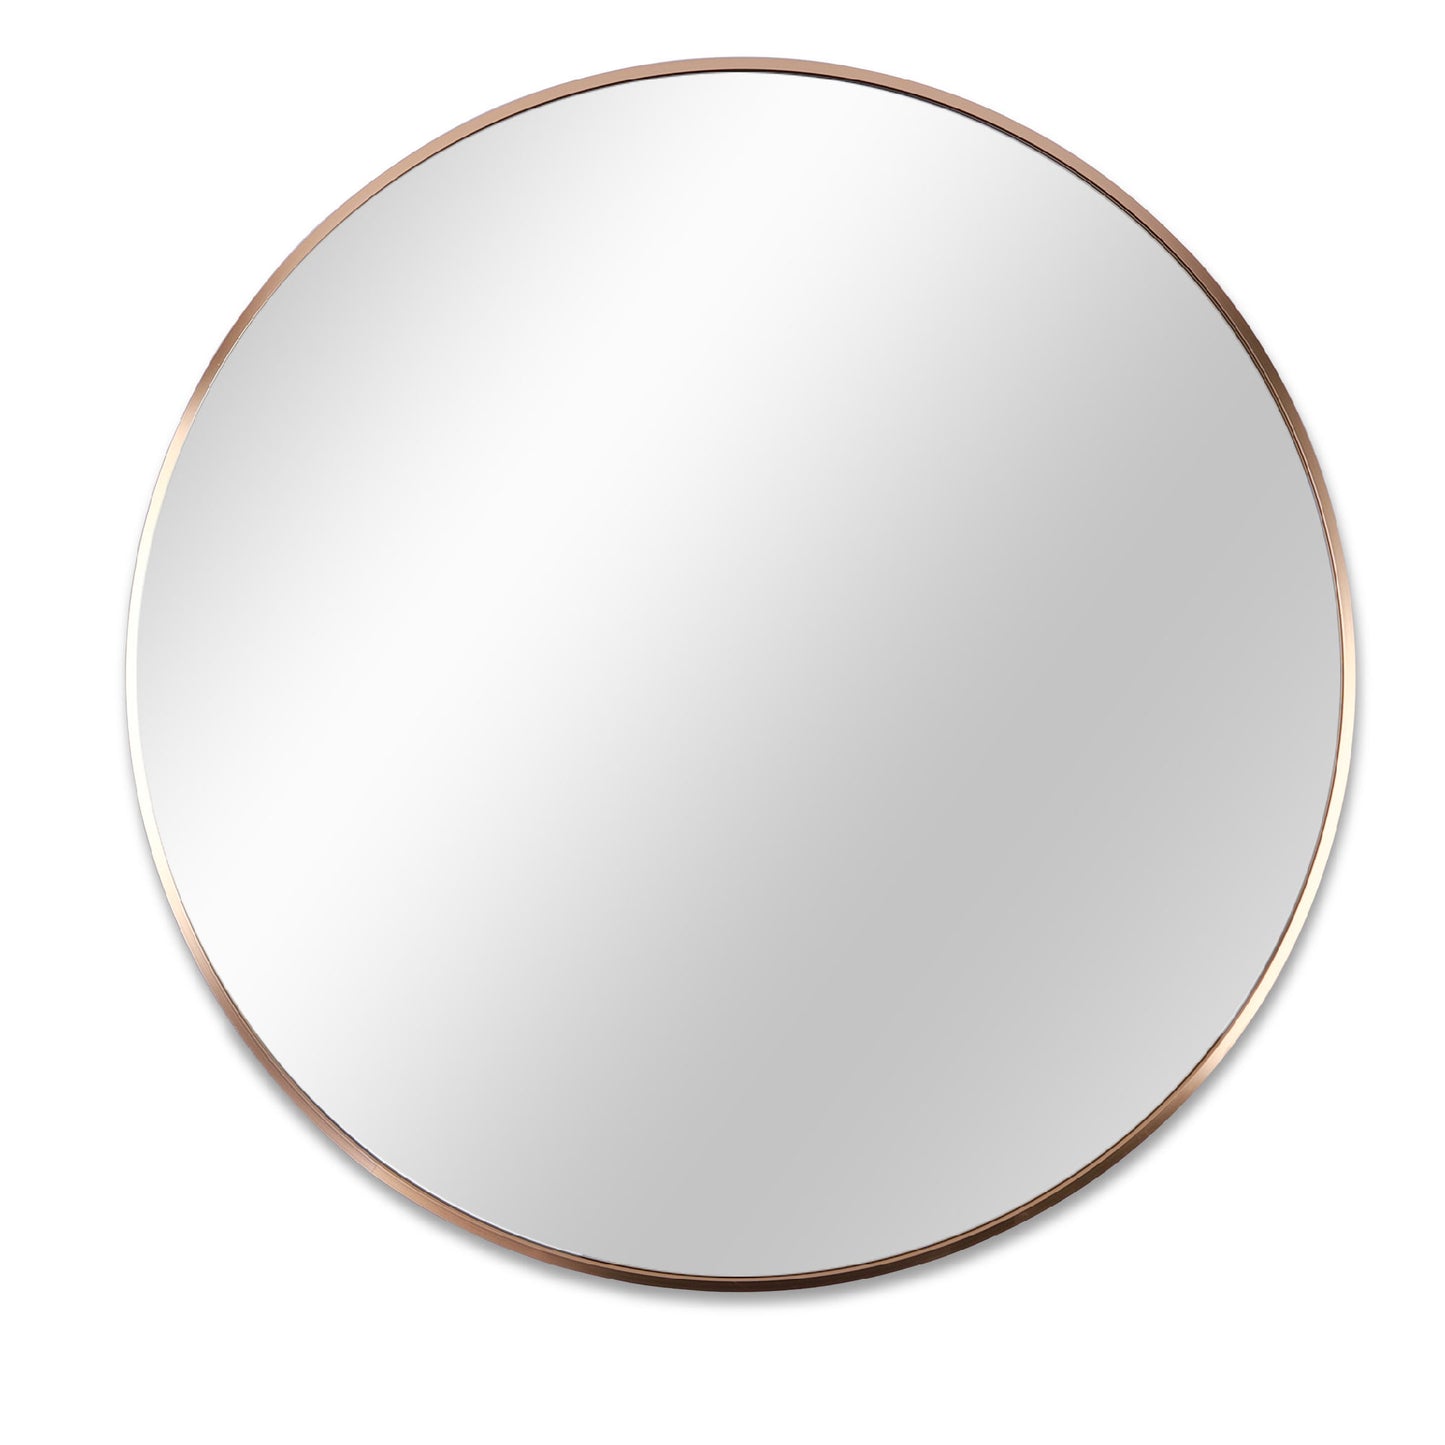 Large Round Mirror 32 Inch with Black Aluminum Frame